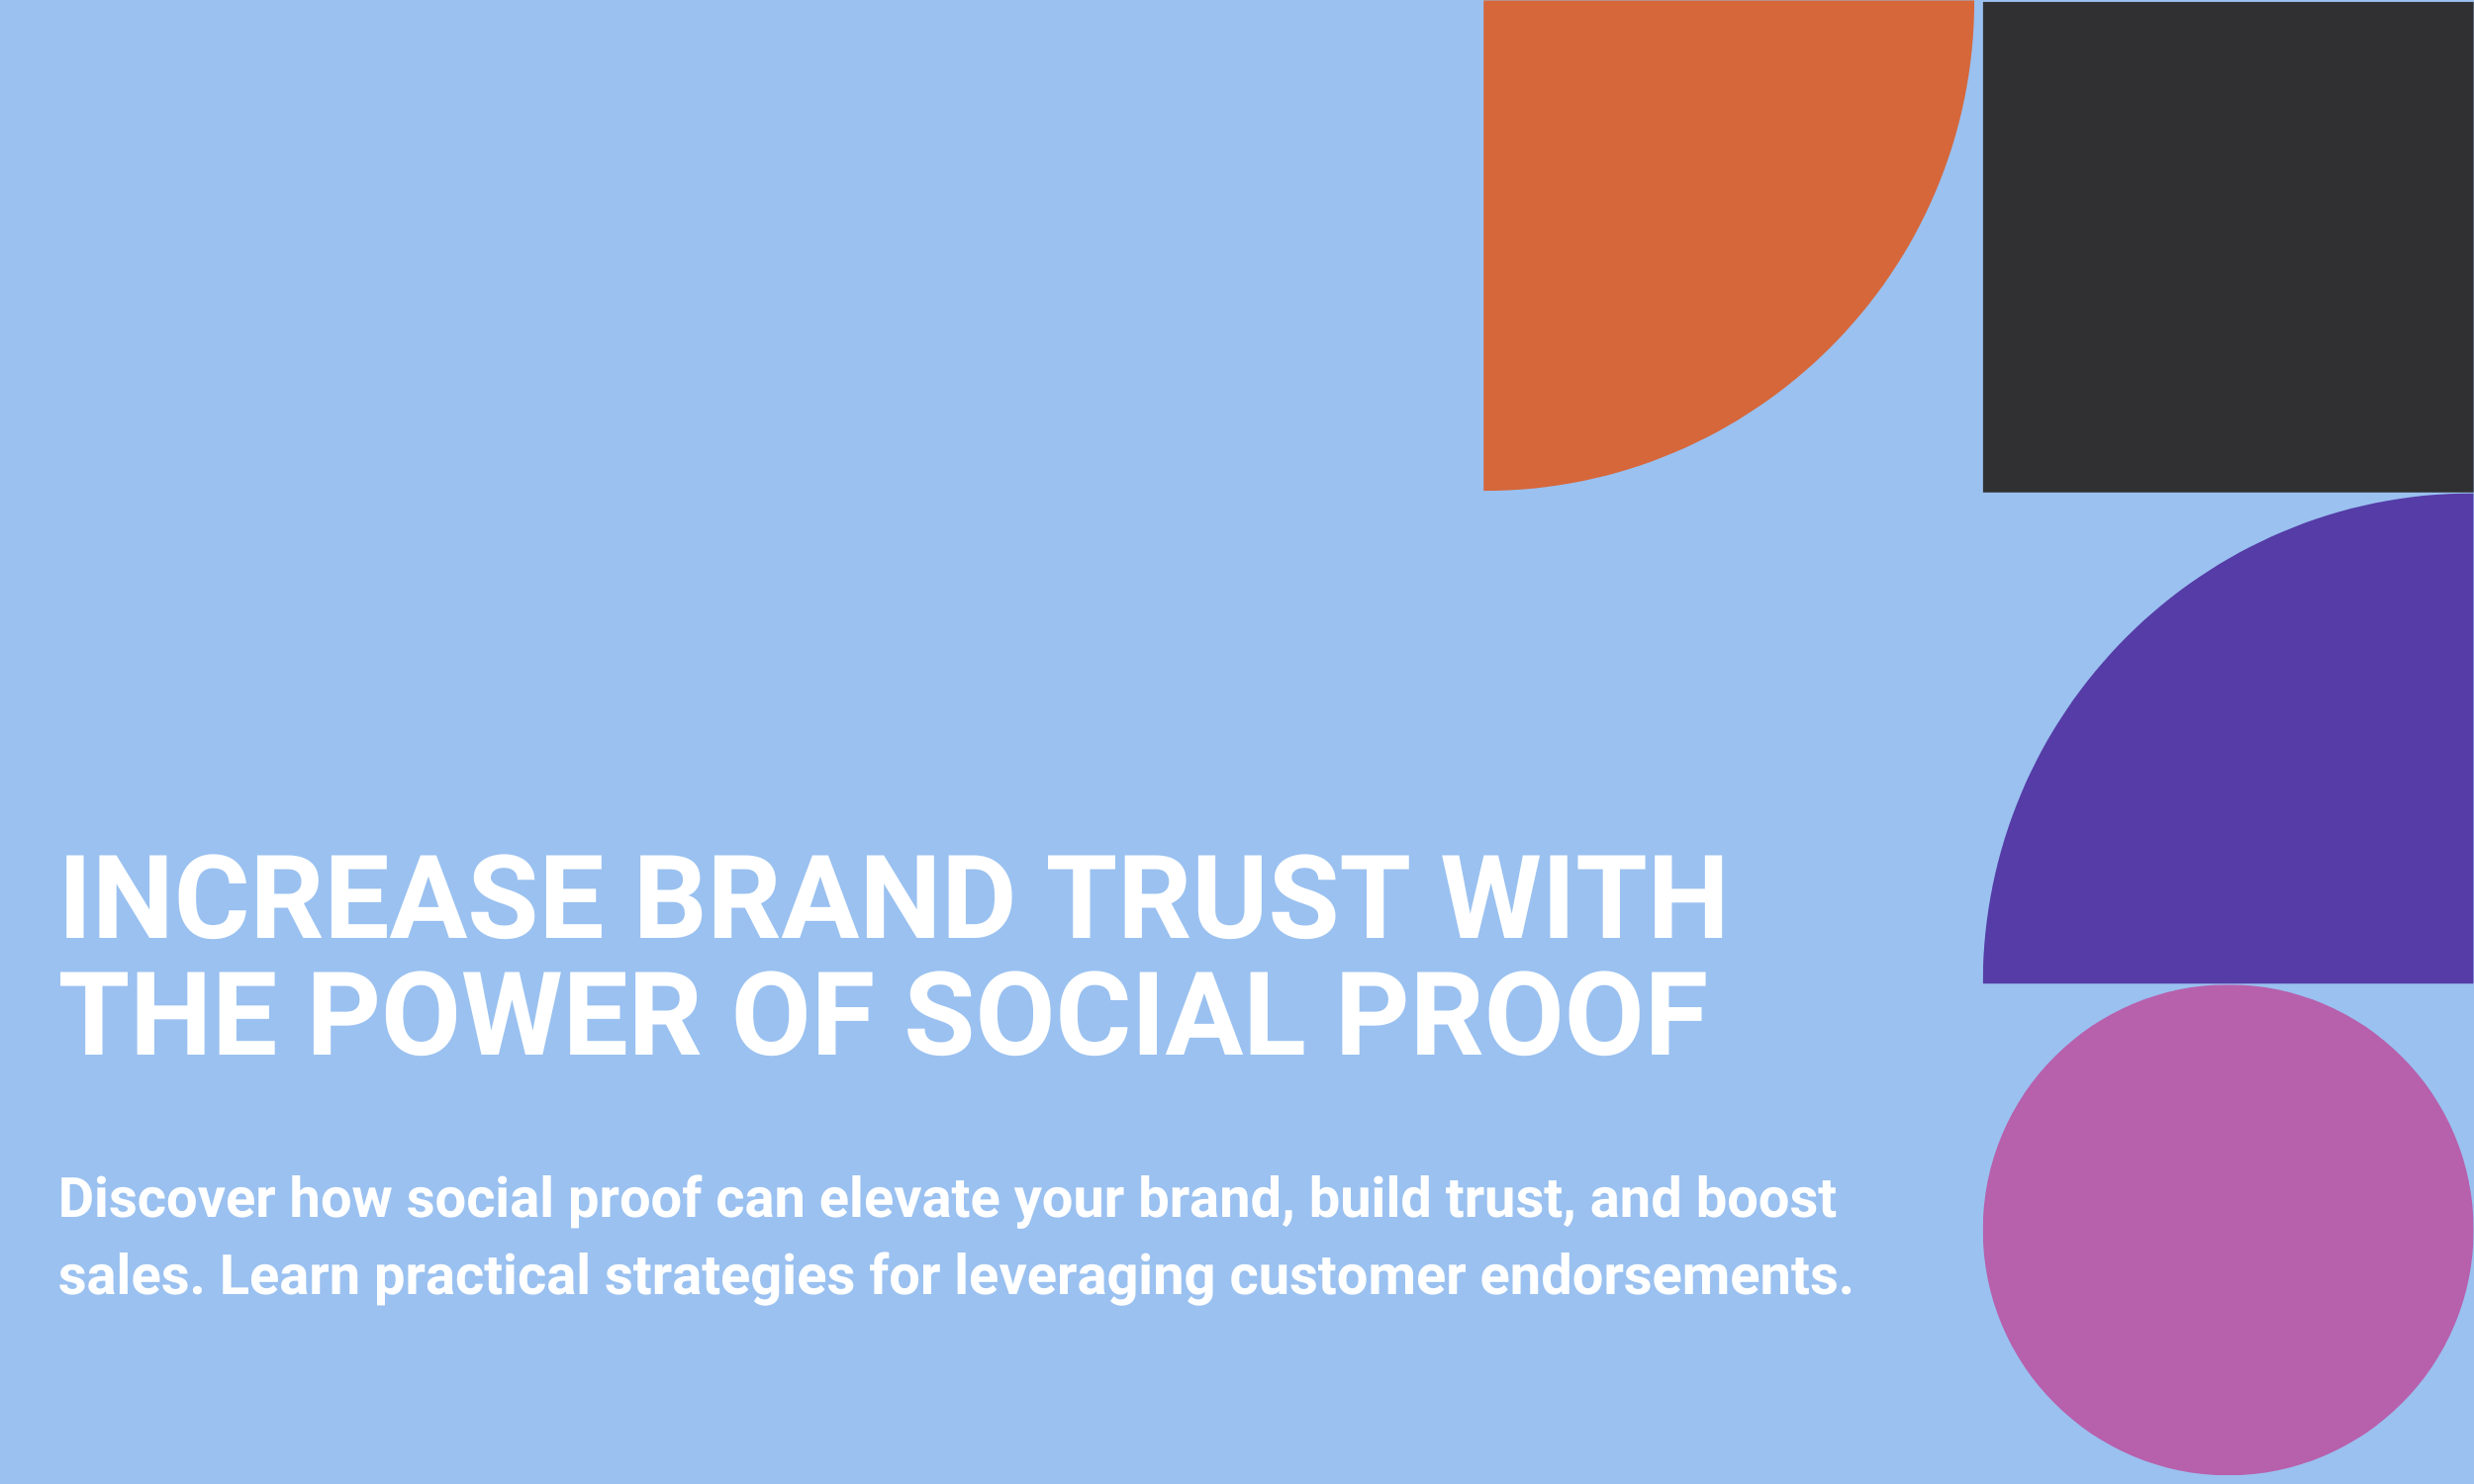 Increase Brand Trust With The Power of Social Proof